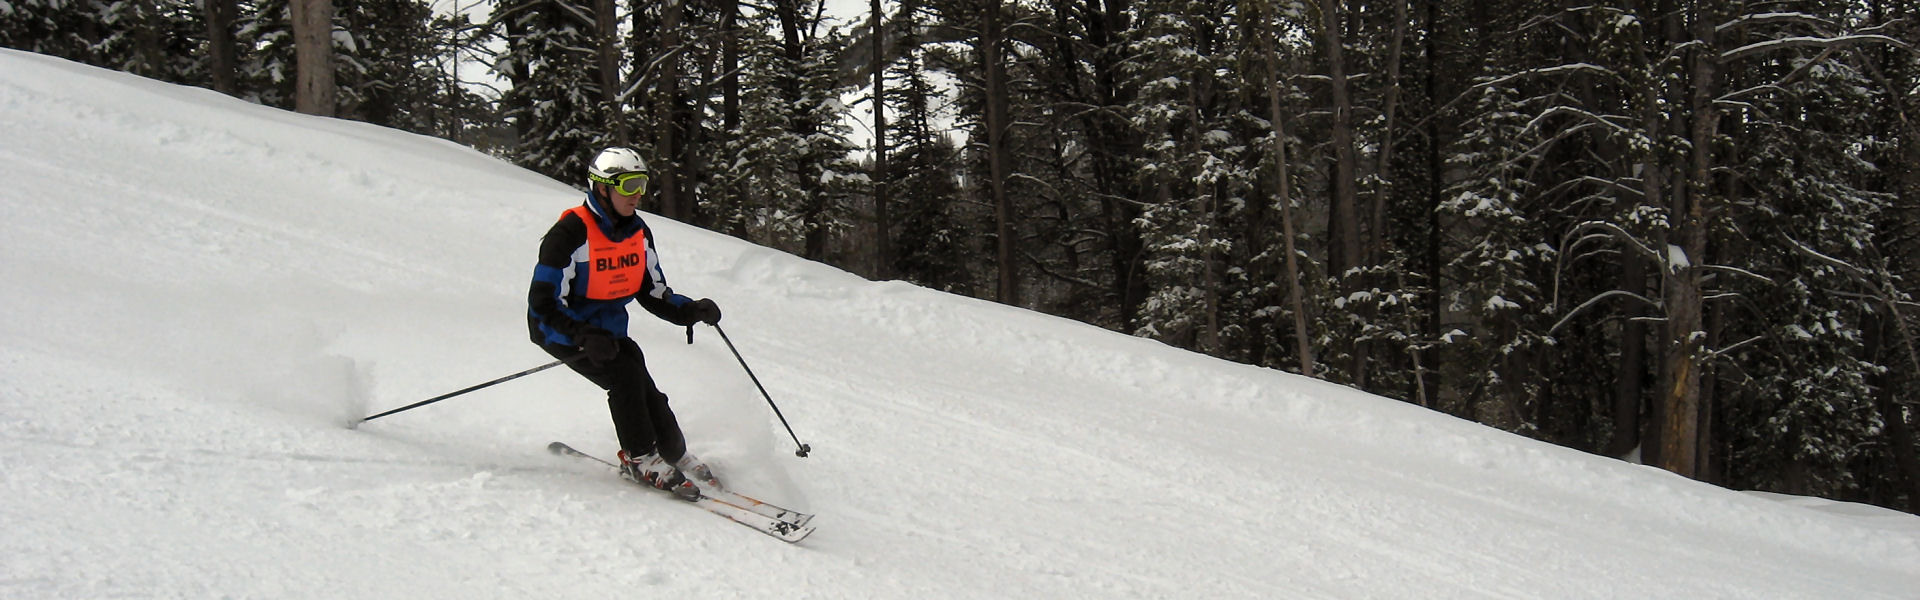 Mike speed skiing